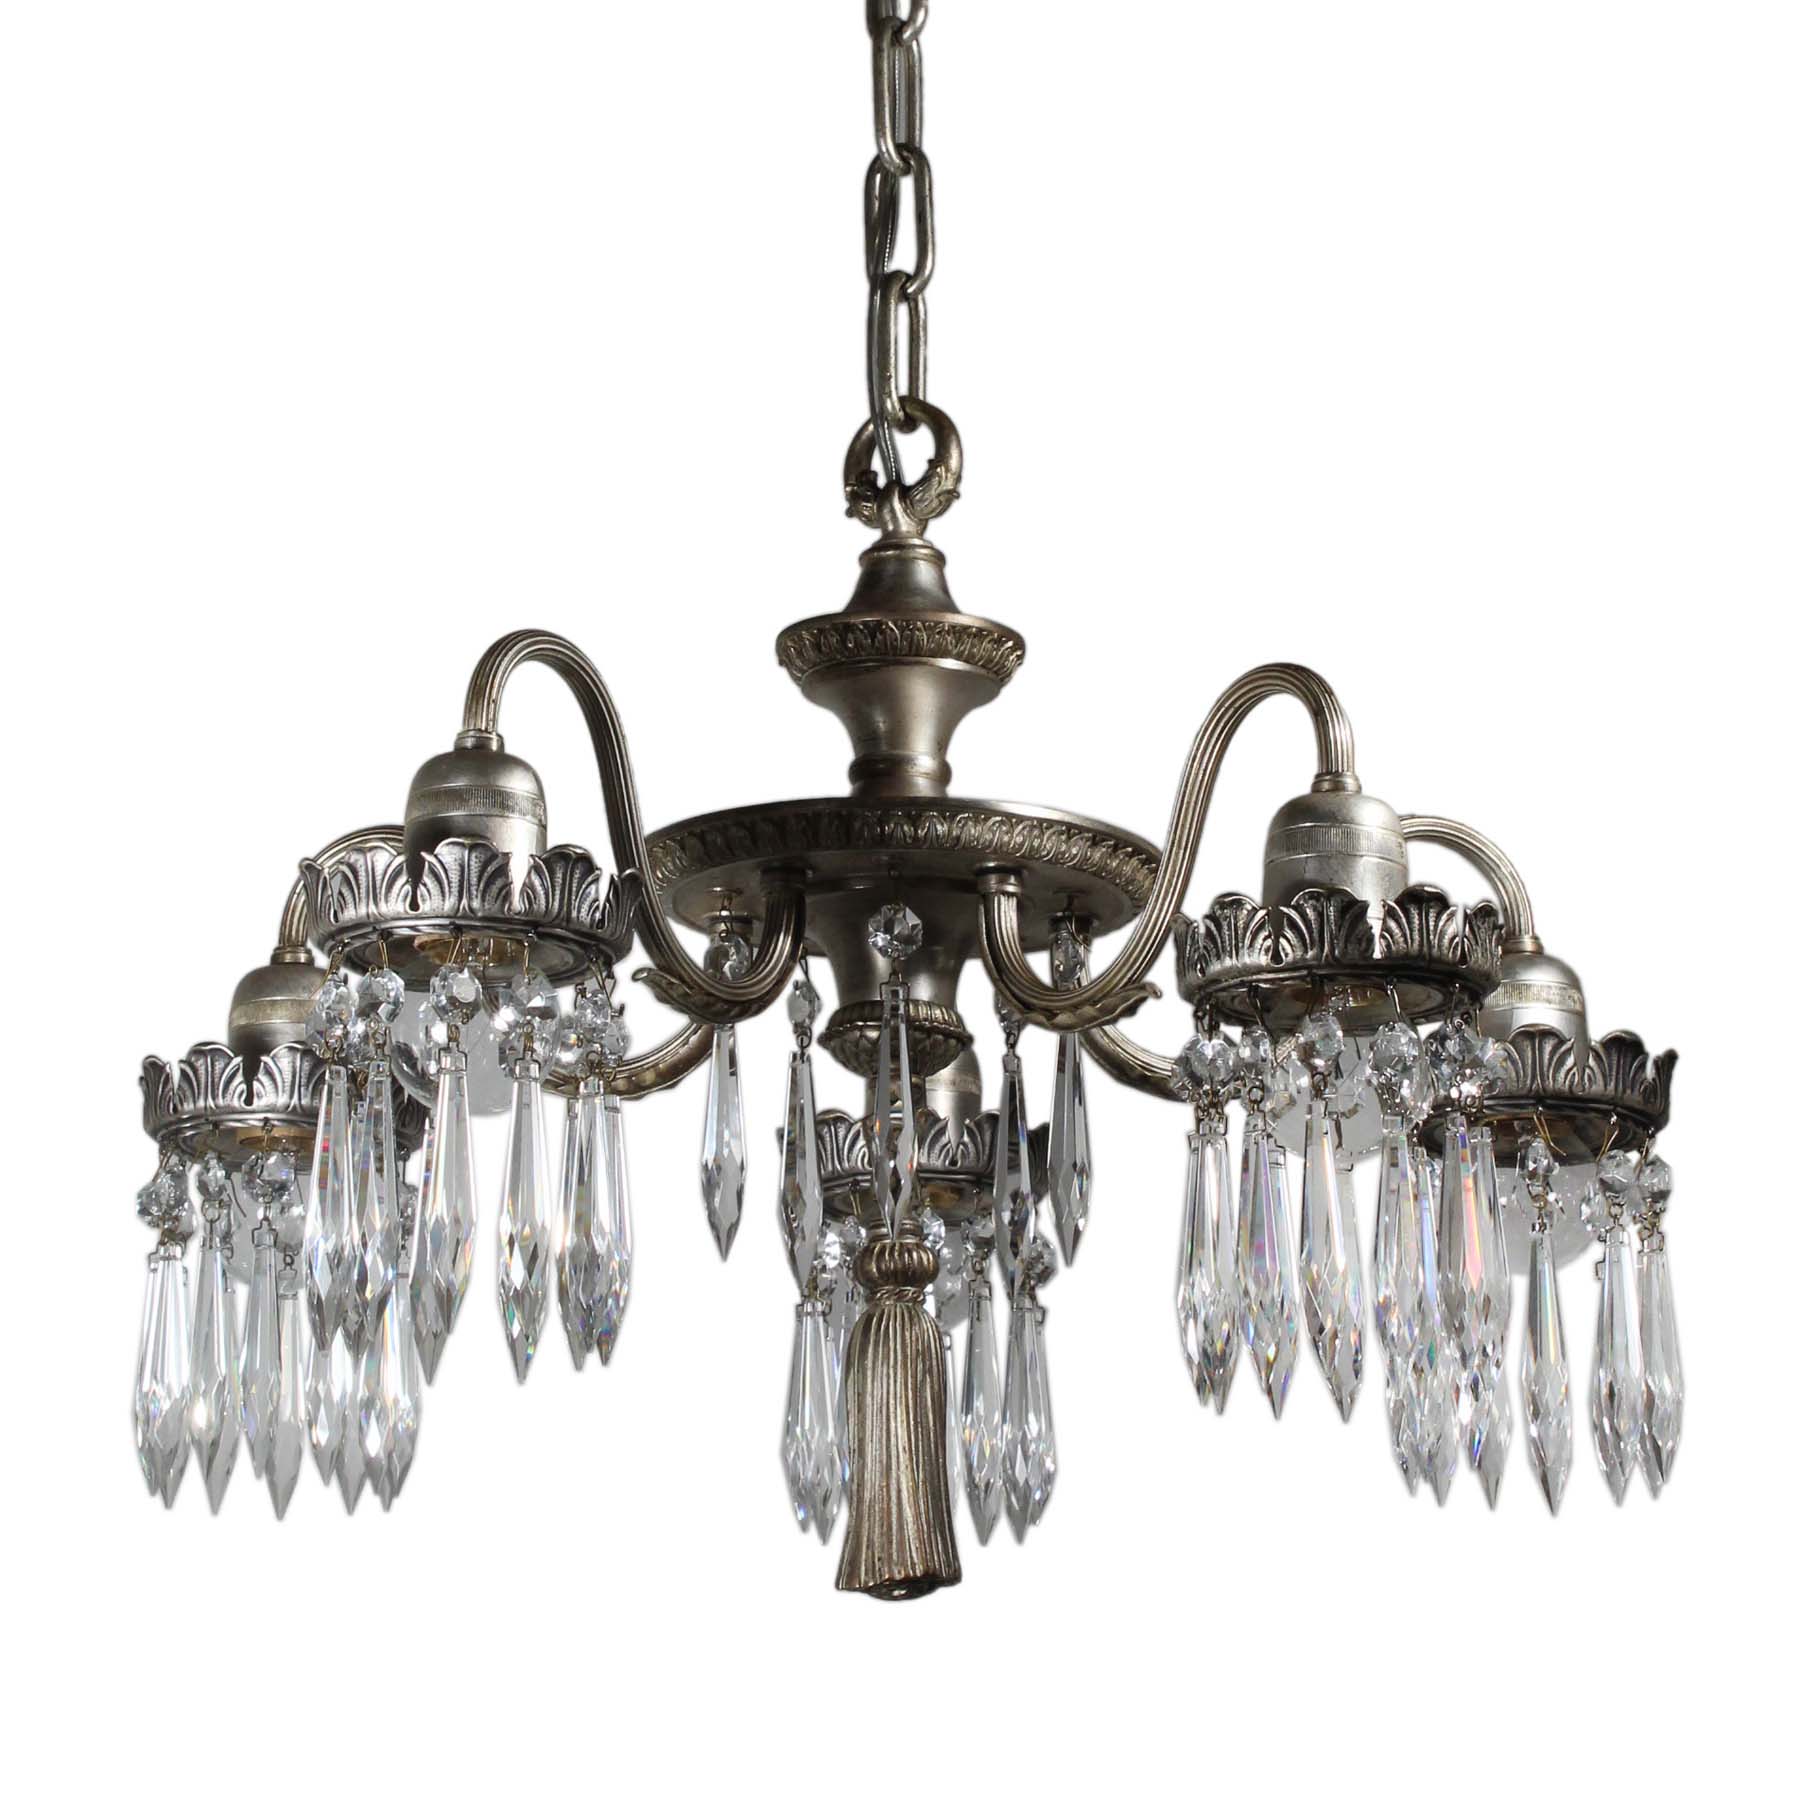 SOLD Antique Neoclassical Silver Plate Chandelier with Prisms-0